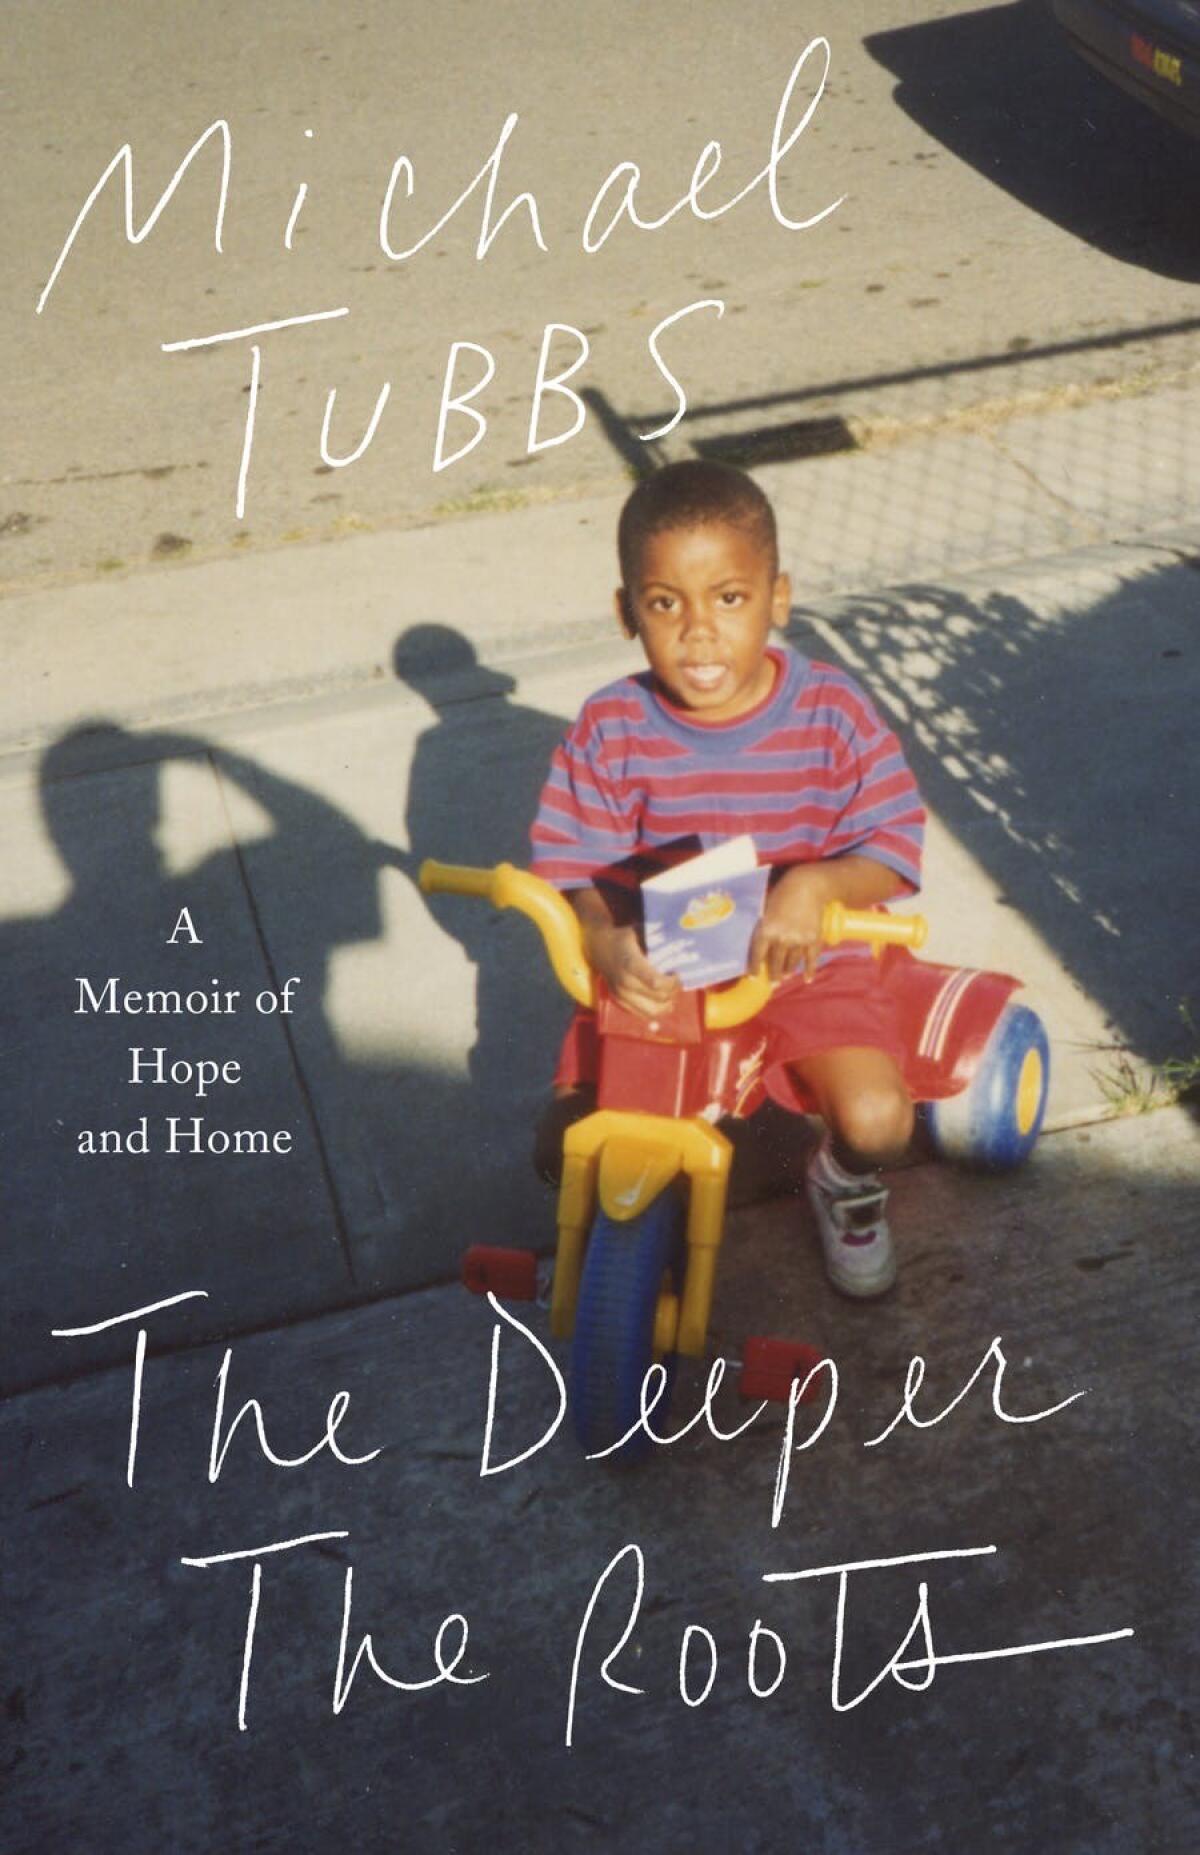 The cover of Michael Tubbs' memoir "The Deeper the Roots."